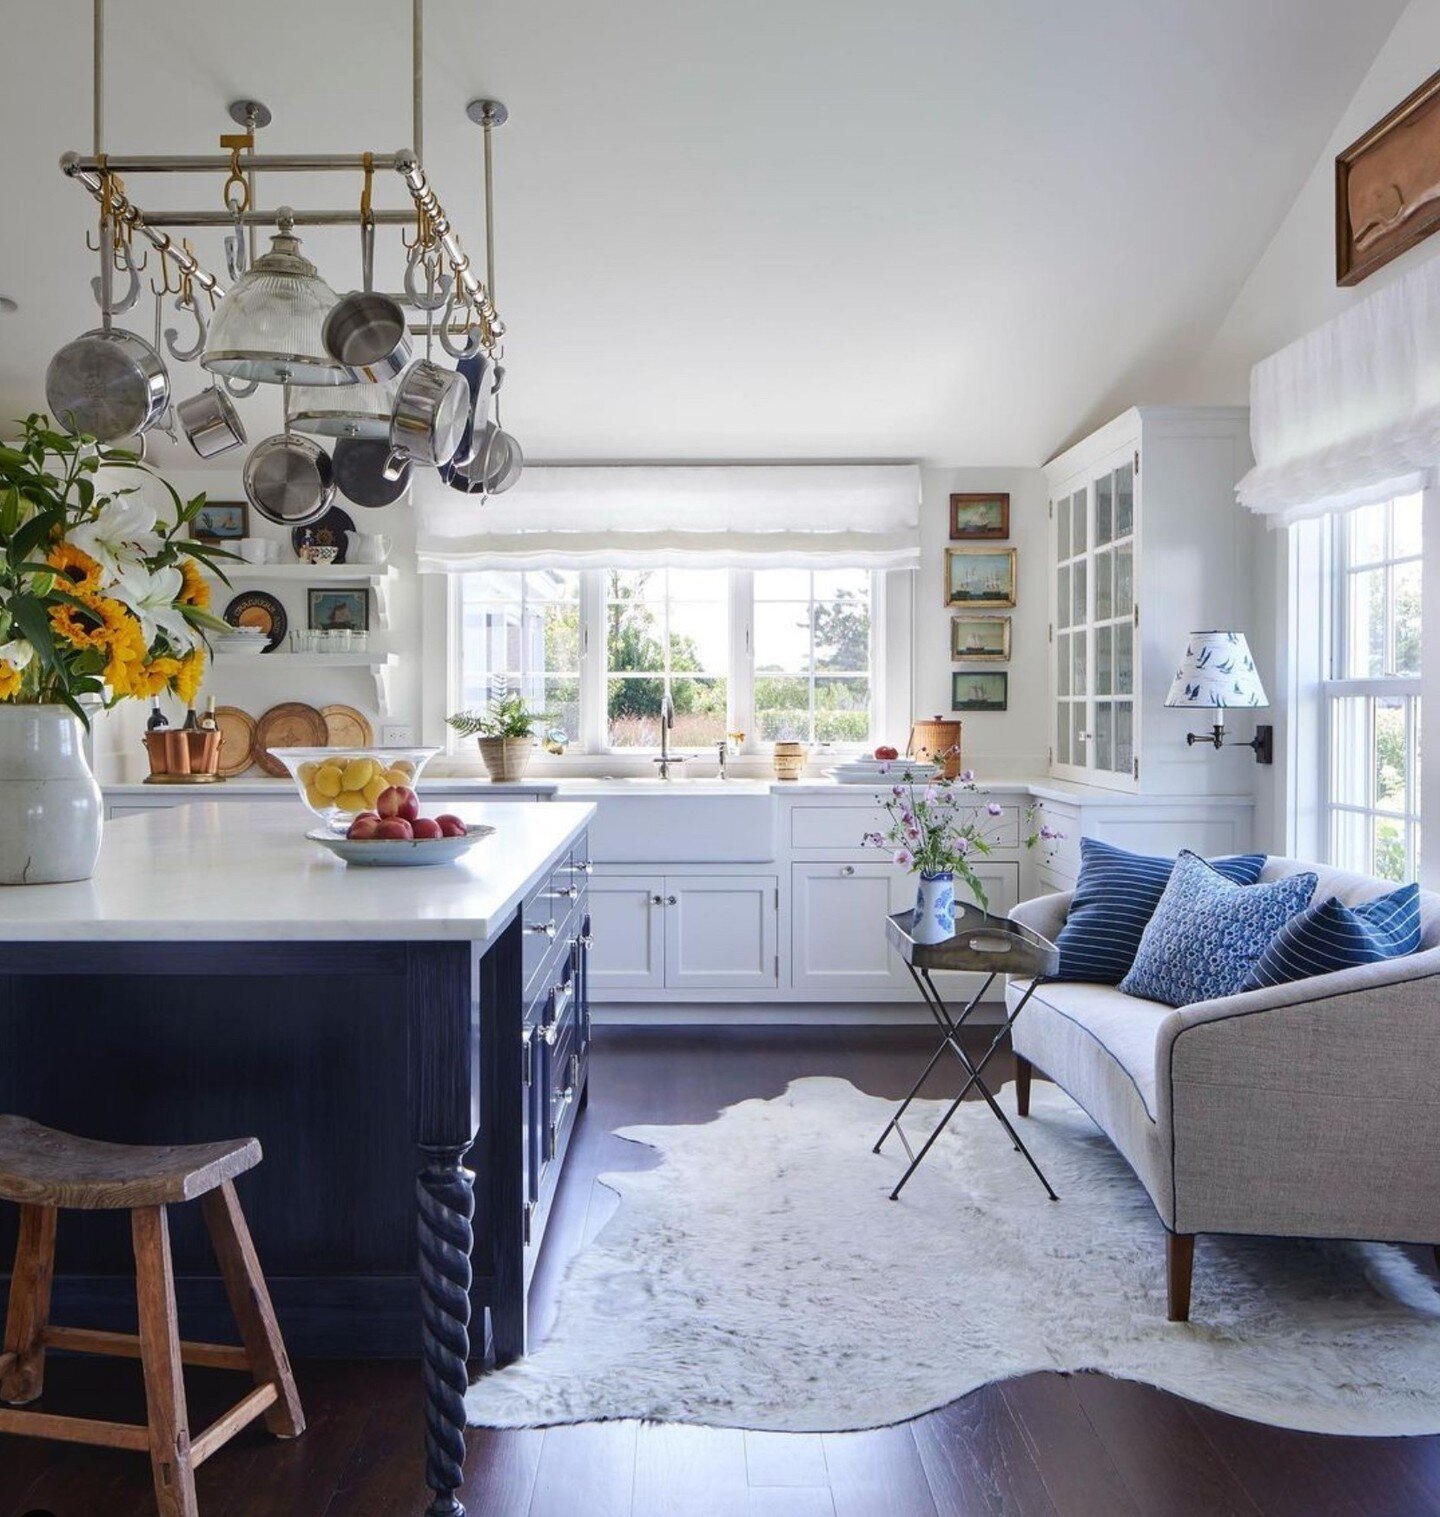 Now this is a kitchen that invites front row seats to the splendor of cooking!  Sit and watch or Taste test in comfort! ⁠
LOVE - LOVE - LOVE!  Cheers to @gary_mcbournie_inc⁠
⁠
photo credit: @annieschlechter⁠
stylist: @howardwchristian⁠
⁠
#styledbyark